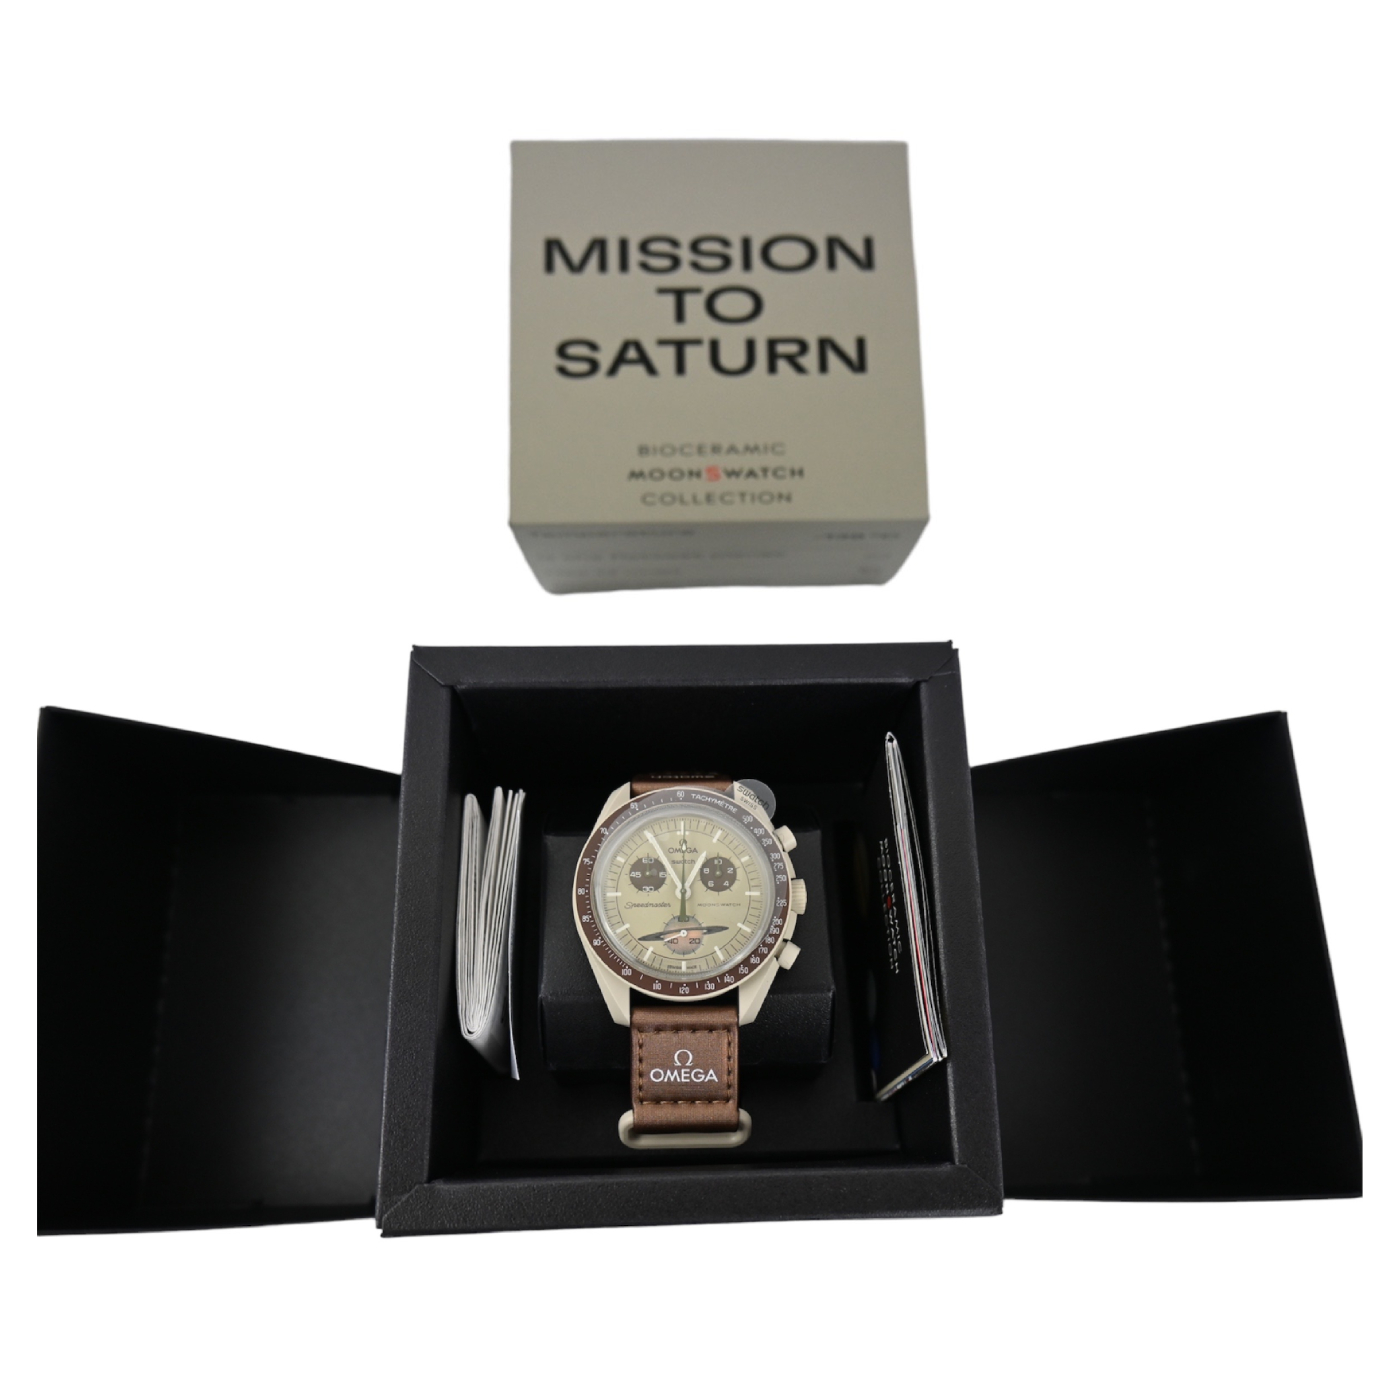 New SWATCH Omega Mission to Saturn chronograph men's watch 2023 